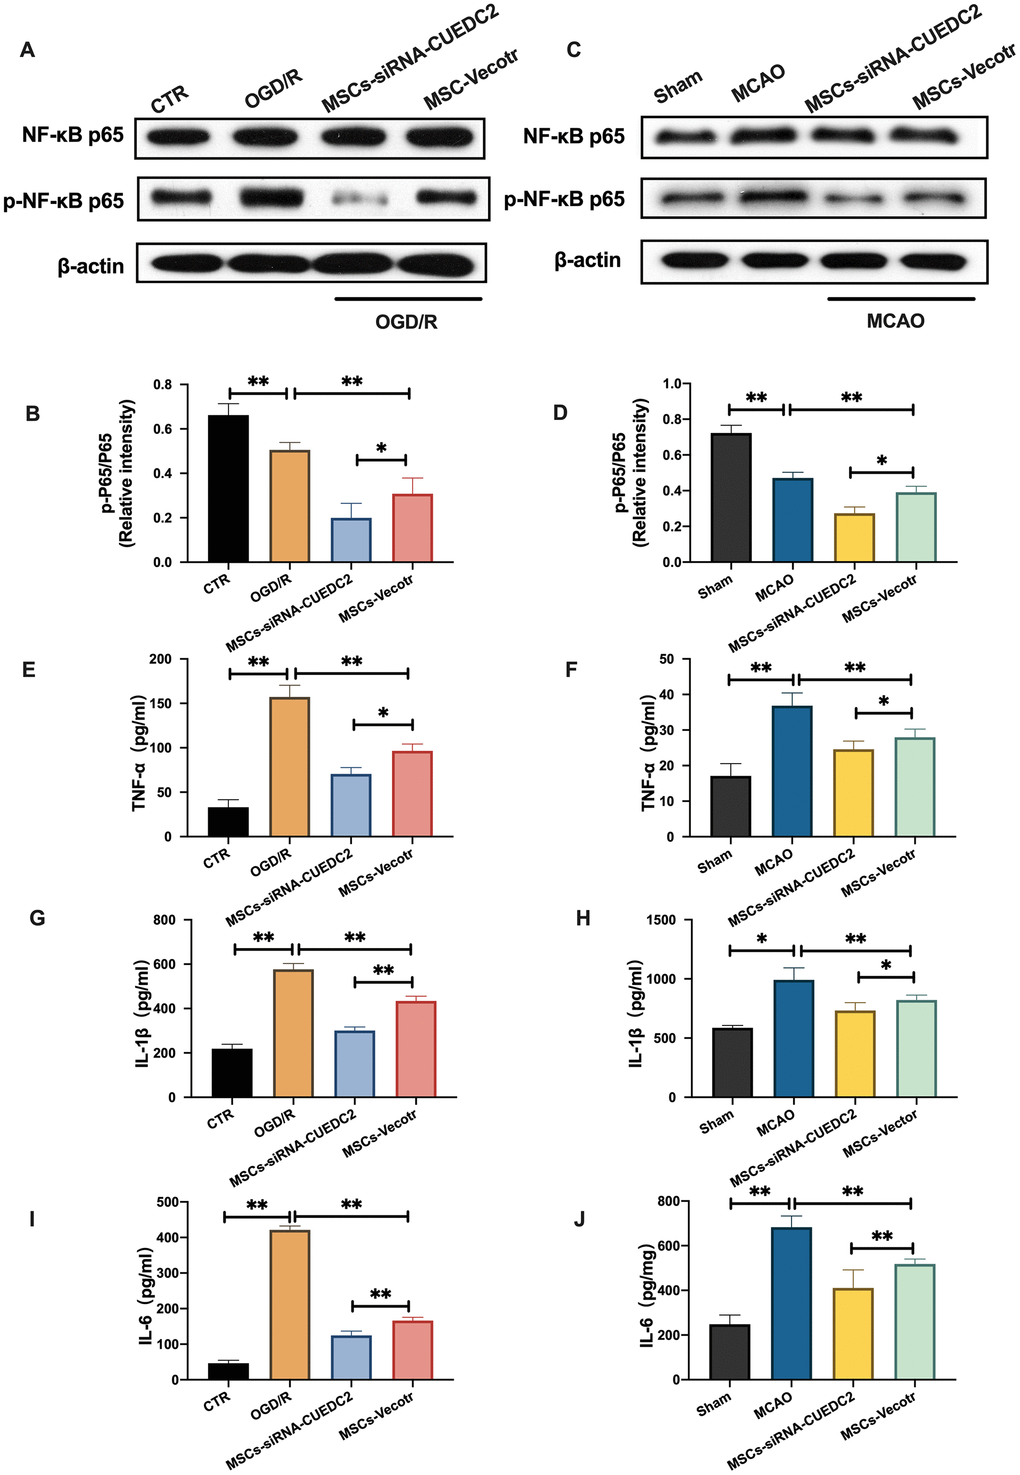 CUEDC2 silencing in MSCs suppresses NF-kB activity following cerebral I/R injury. (A, B) NF-kB and p-NF-kB protein expression in co-cultured neurons as detected by western blotting. (C, D) NF-kB and p-NF-kB protein expression in brain tissues as detected by western blotting. (E) TNF-α level in co-cultured neurons as detected by ELISA assay. (F) TNF-α level in brain tissues as analyzed by ELISA assay. (G) IL-1β level in co-cultured neurons as determined by ELISA assay. (H) IL-1β level in brain tissues as analyzed by ELISA assay. (I) IL-6 level in co-cultured neurons as evaluated by ELISA assay. (J) IL-6 level in brain tissues as determined by ELISA assay. CTR: control; CUEDC2: CUE domain-containing 2; OGD/R: oxygen-glucose deprivation (4 hours) and reperfusion (24 hours). MSCs: mesenchymal stem cells; MSCs-siRNA-CUEDC2: small interfering RNA silencing CUEDC2 in MSCs; MSCs-vector: the vector of MSCs; MCAO, middle cerebral artery occlusion. All data are presented as the mean value ± SD. *p